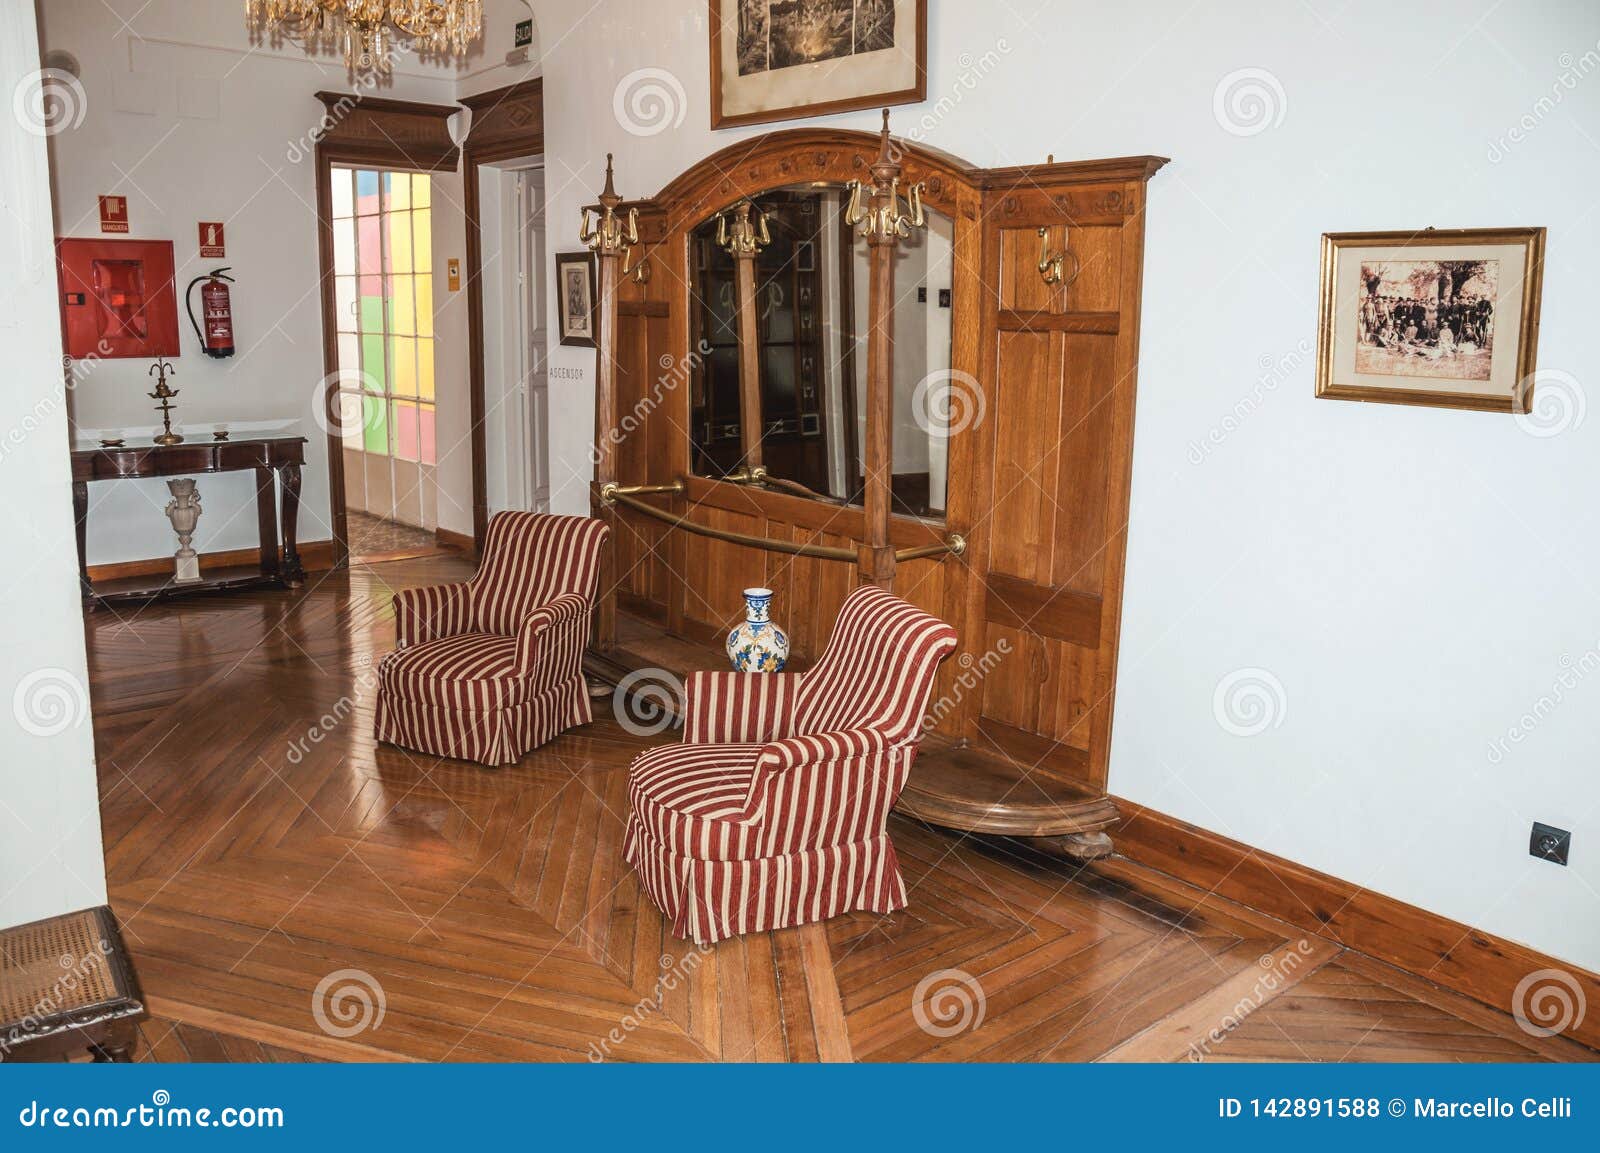 Living Room With Antique Furniture In Historical Building